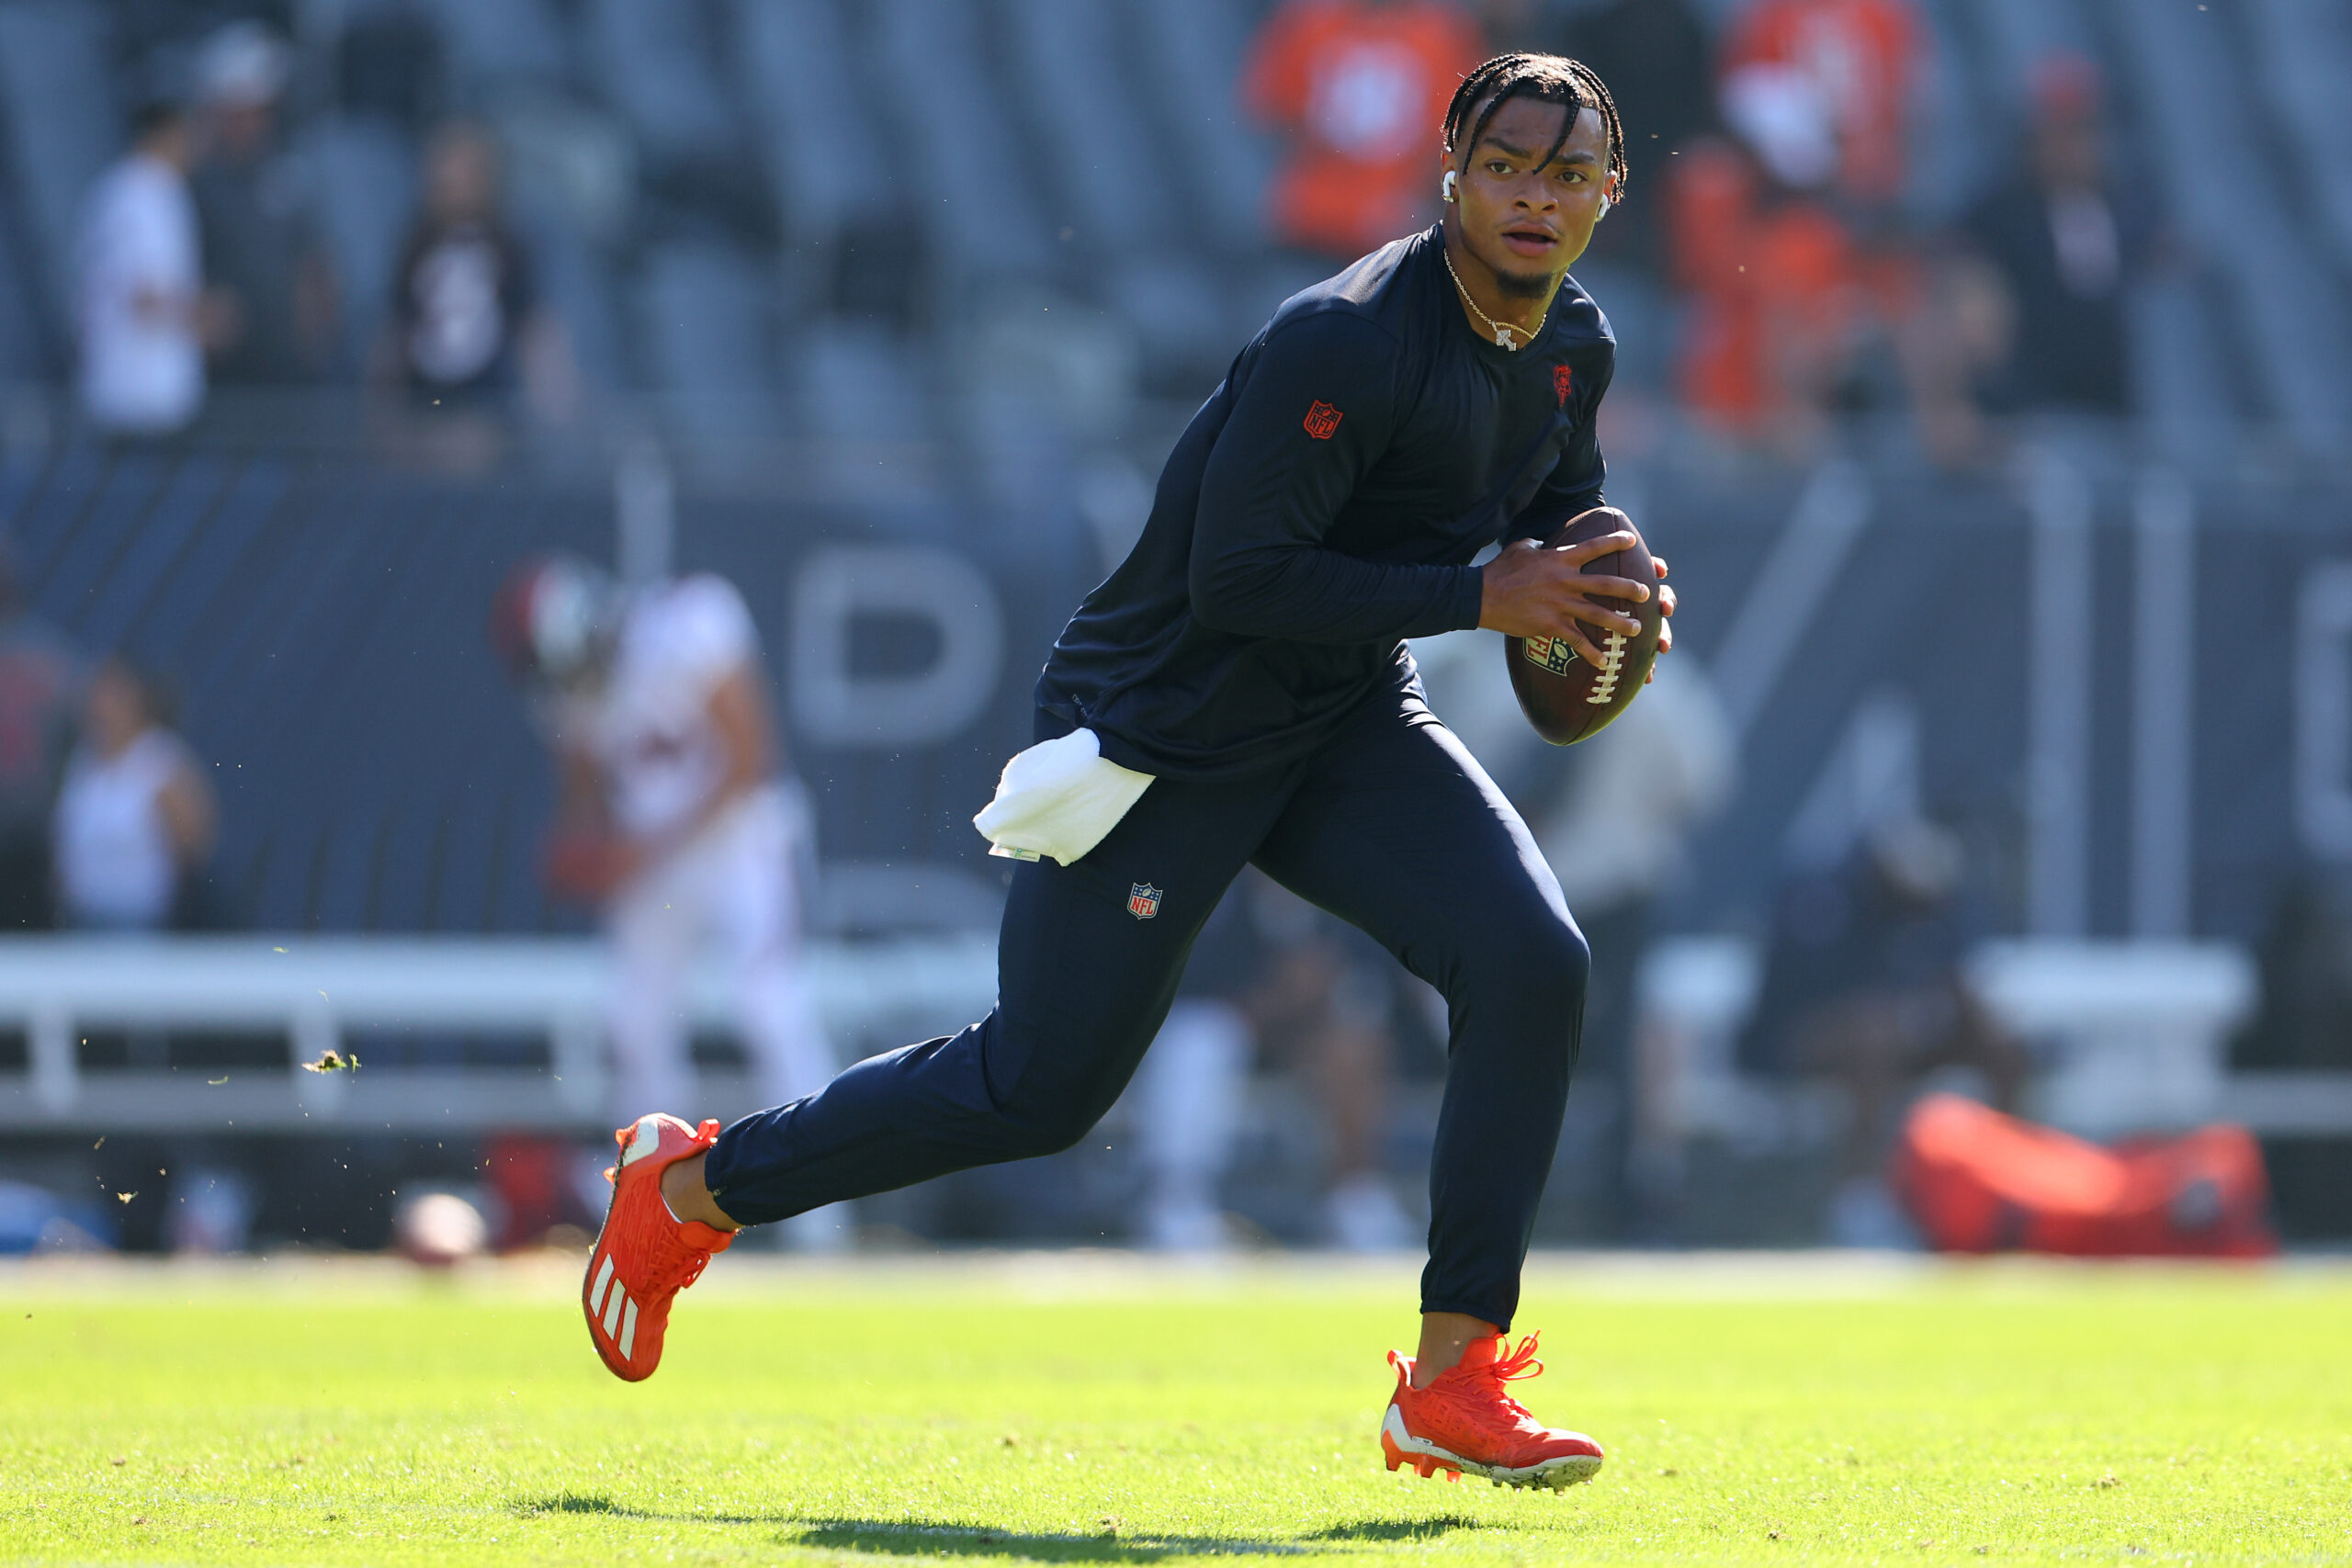 Do the Pittsburgh Steelers have a position change in mind for Justin Fields?